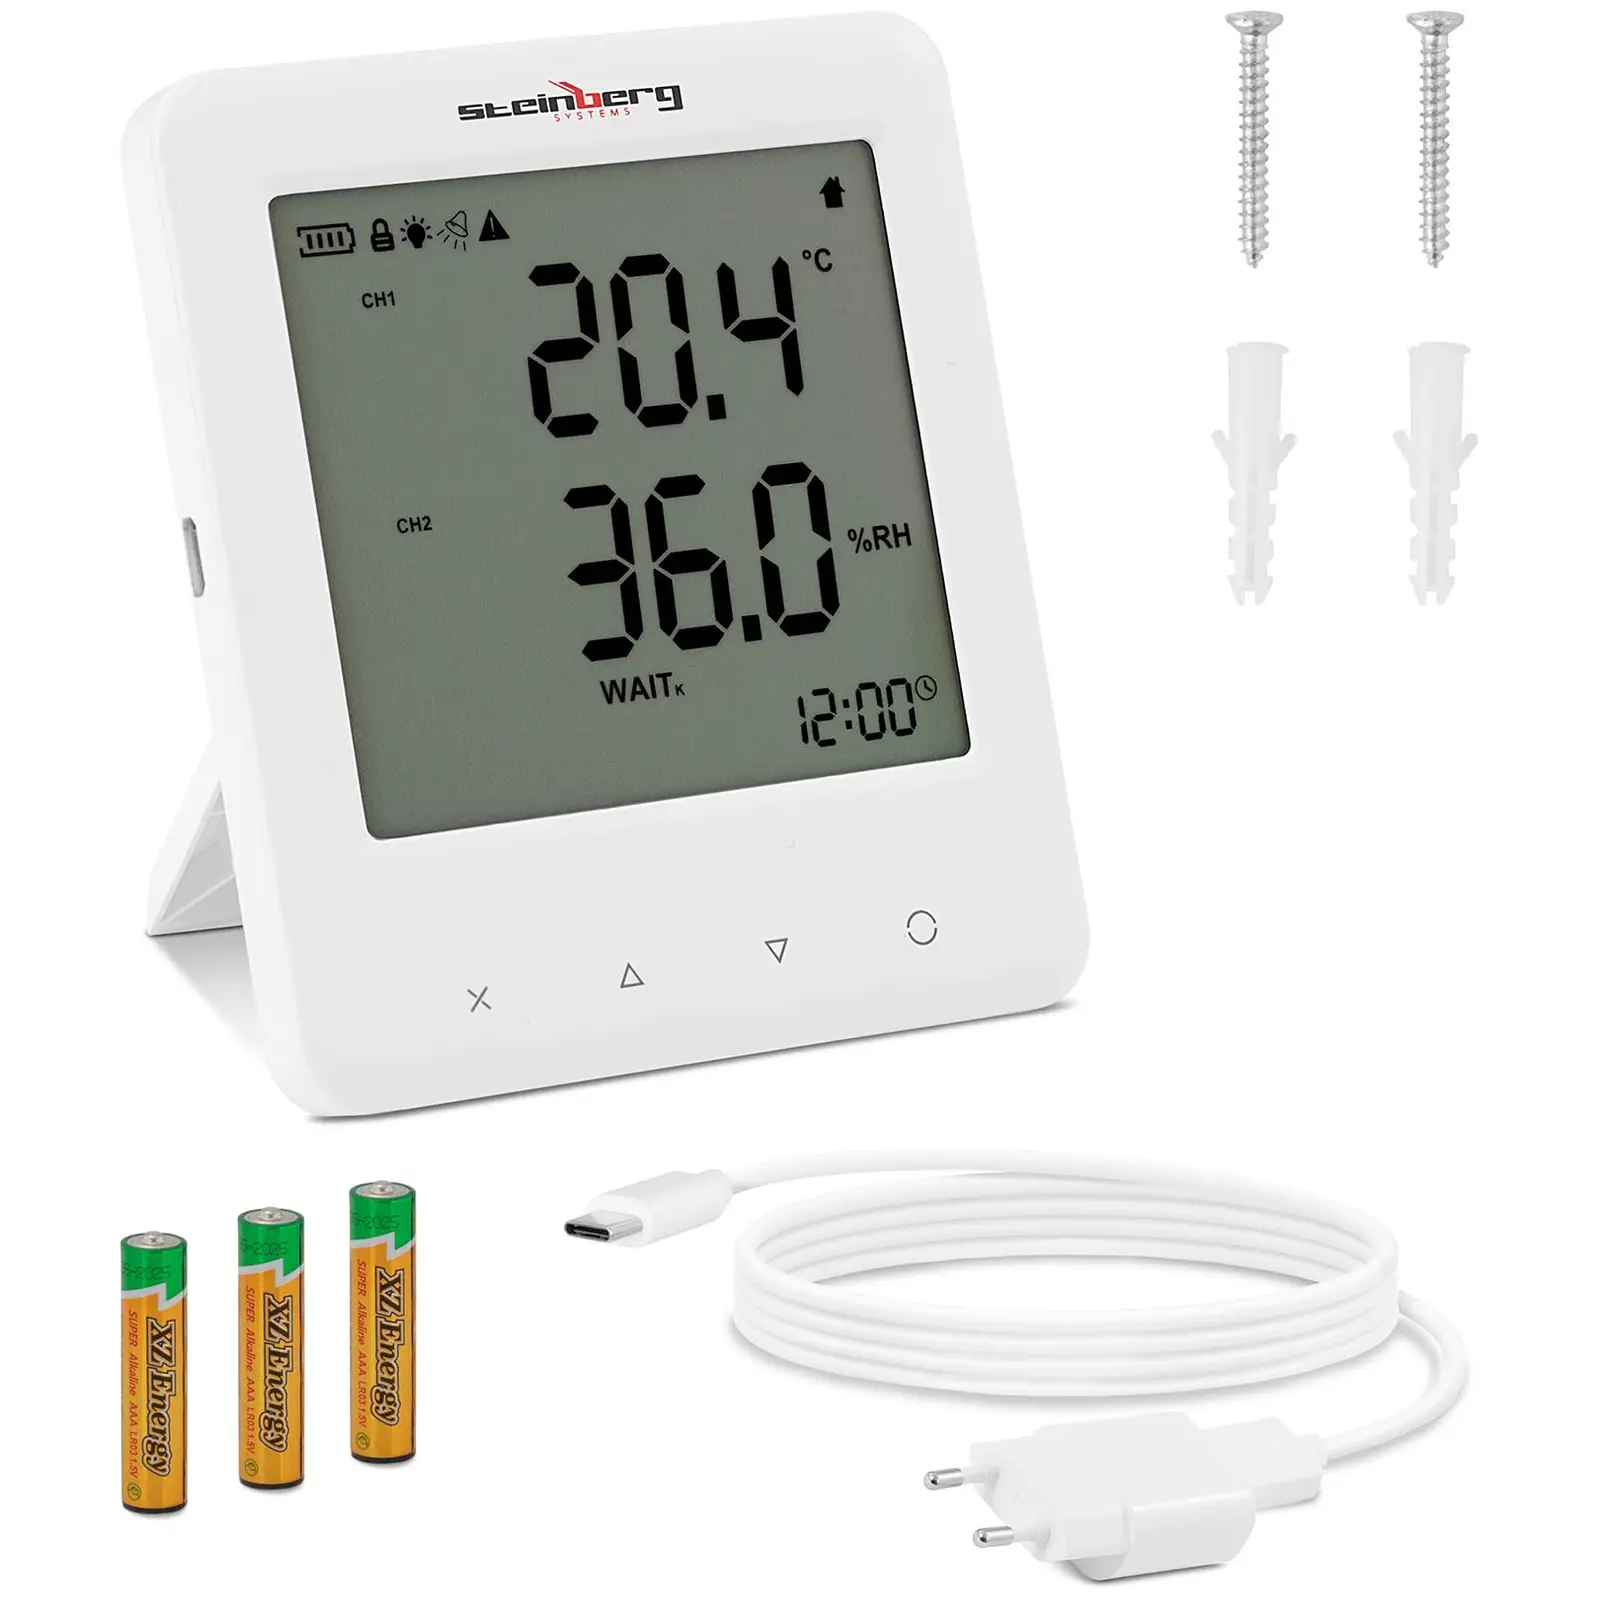 CO2 Meter - incl. temperature and humidity